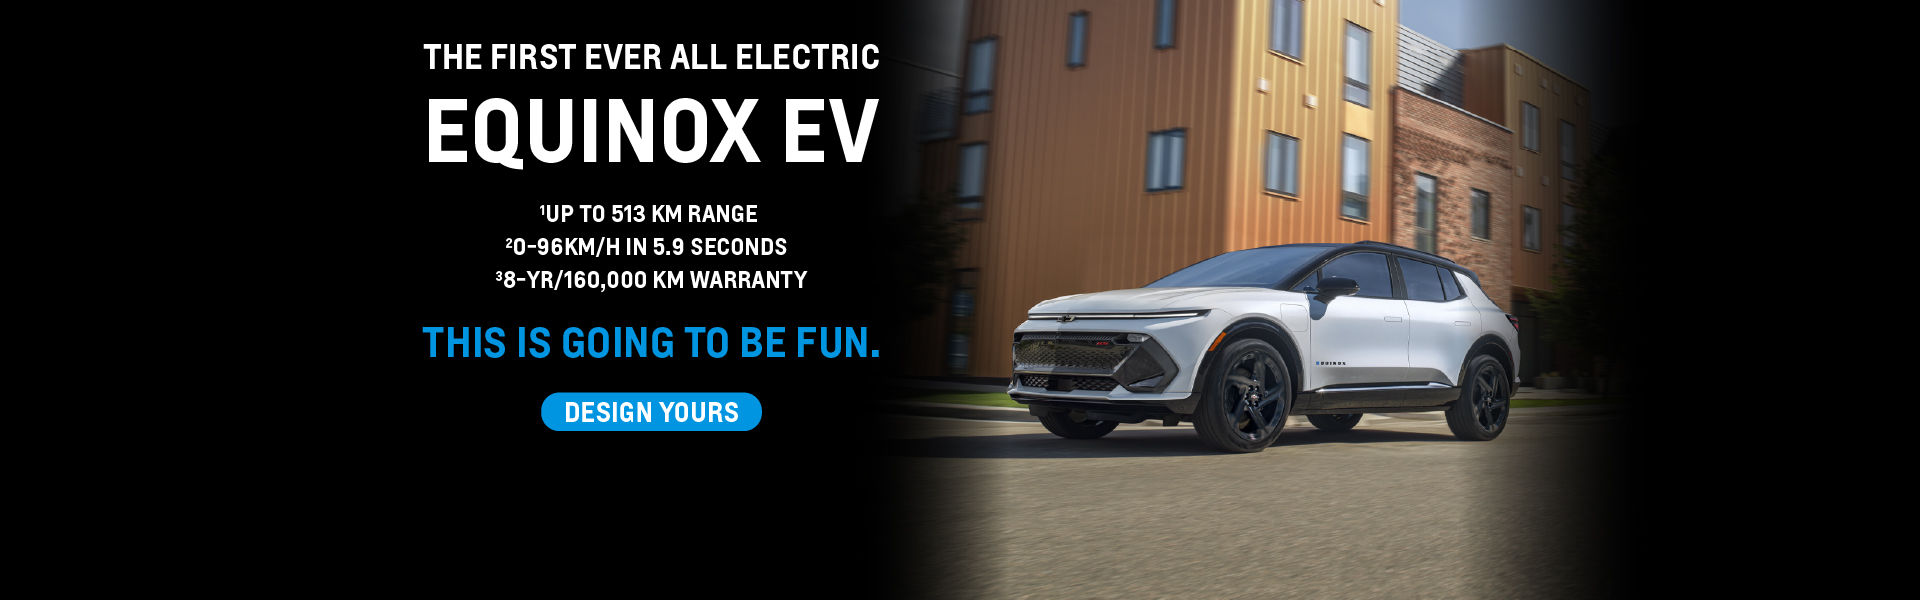 The First Ever All Electric Equinox EV